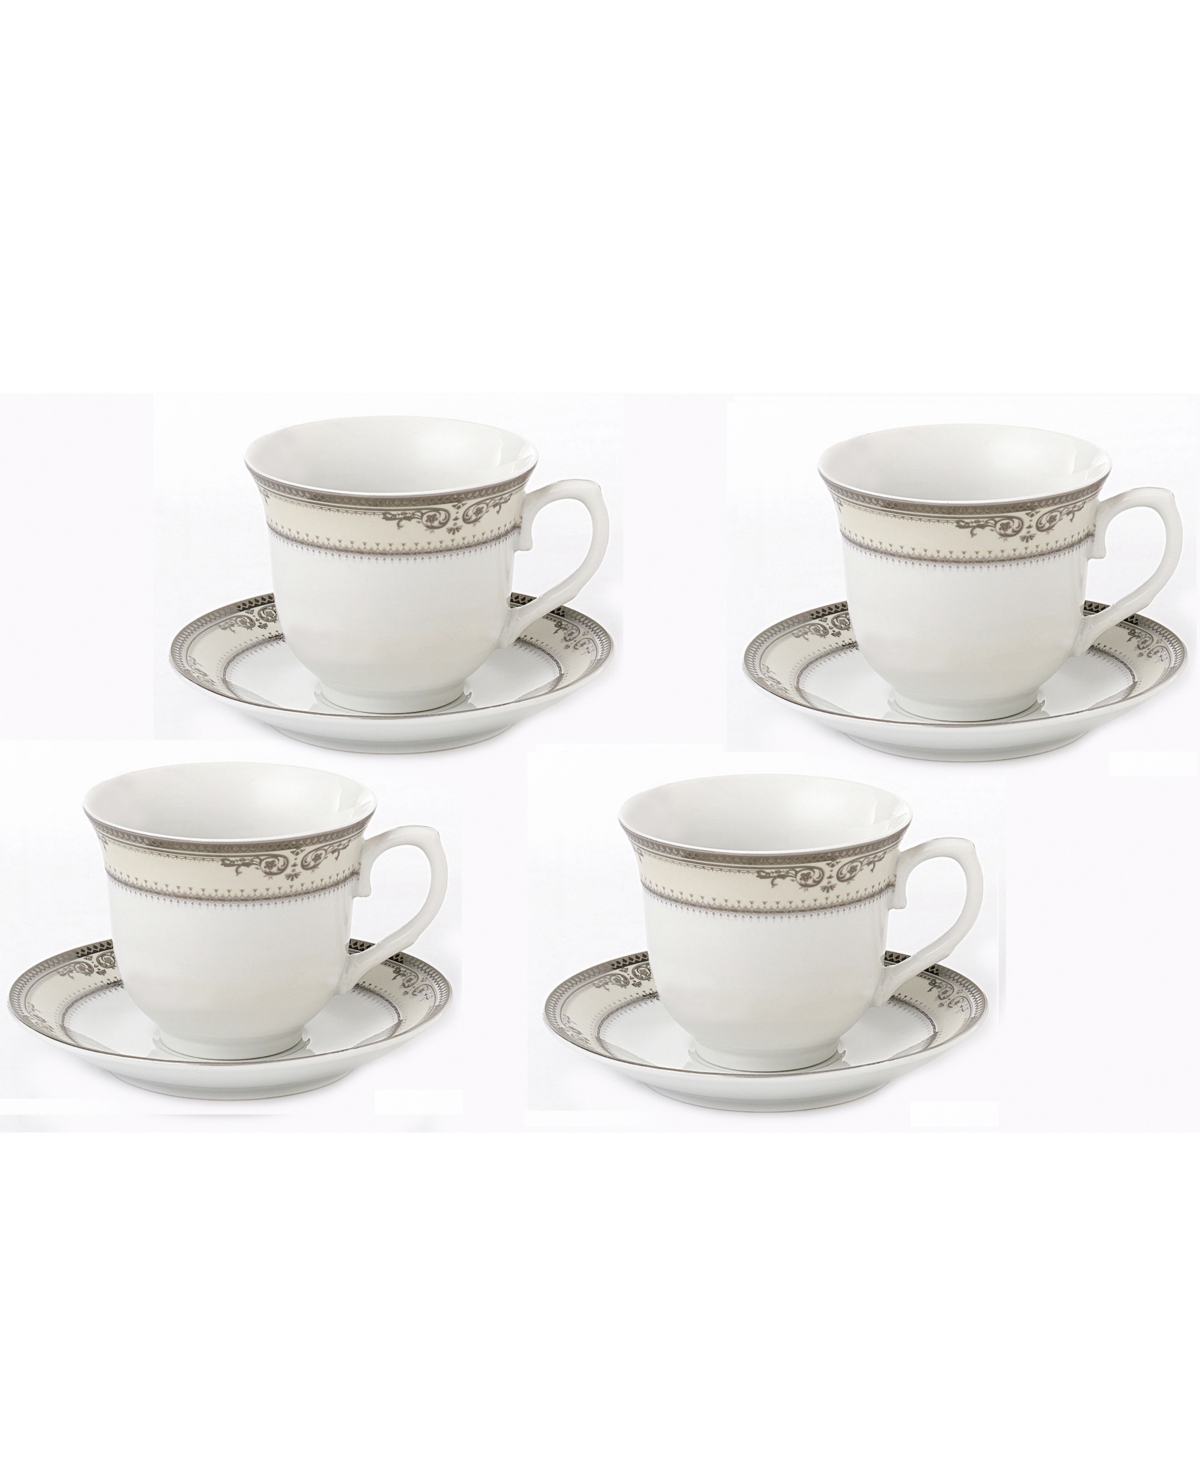 Lorren Home Trends Tea And Coffee Set, 8 Piece In Silver-tone